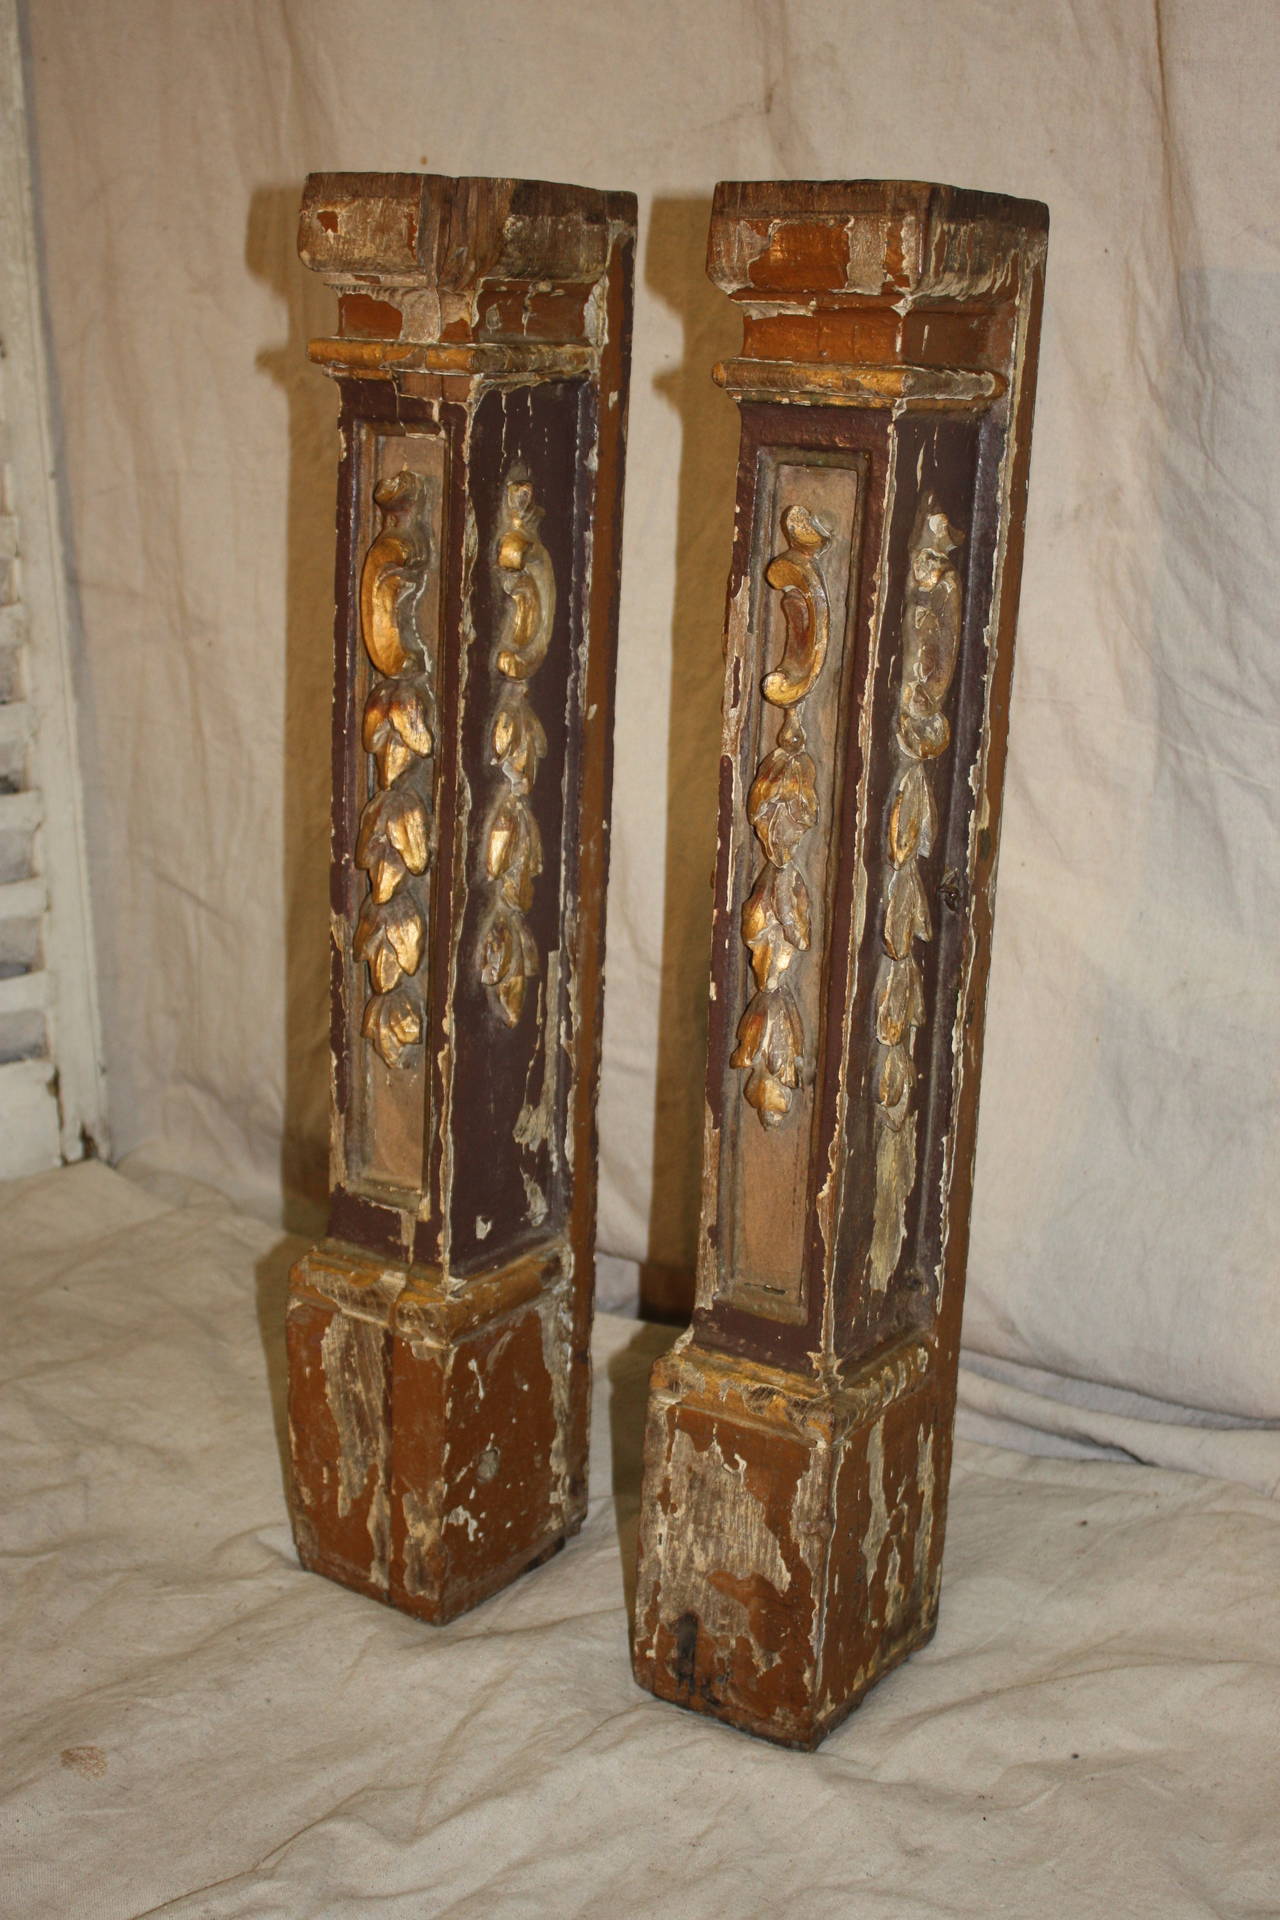 Polychromed 18th Century Pair of Italian Pedestals For Sale